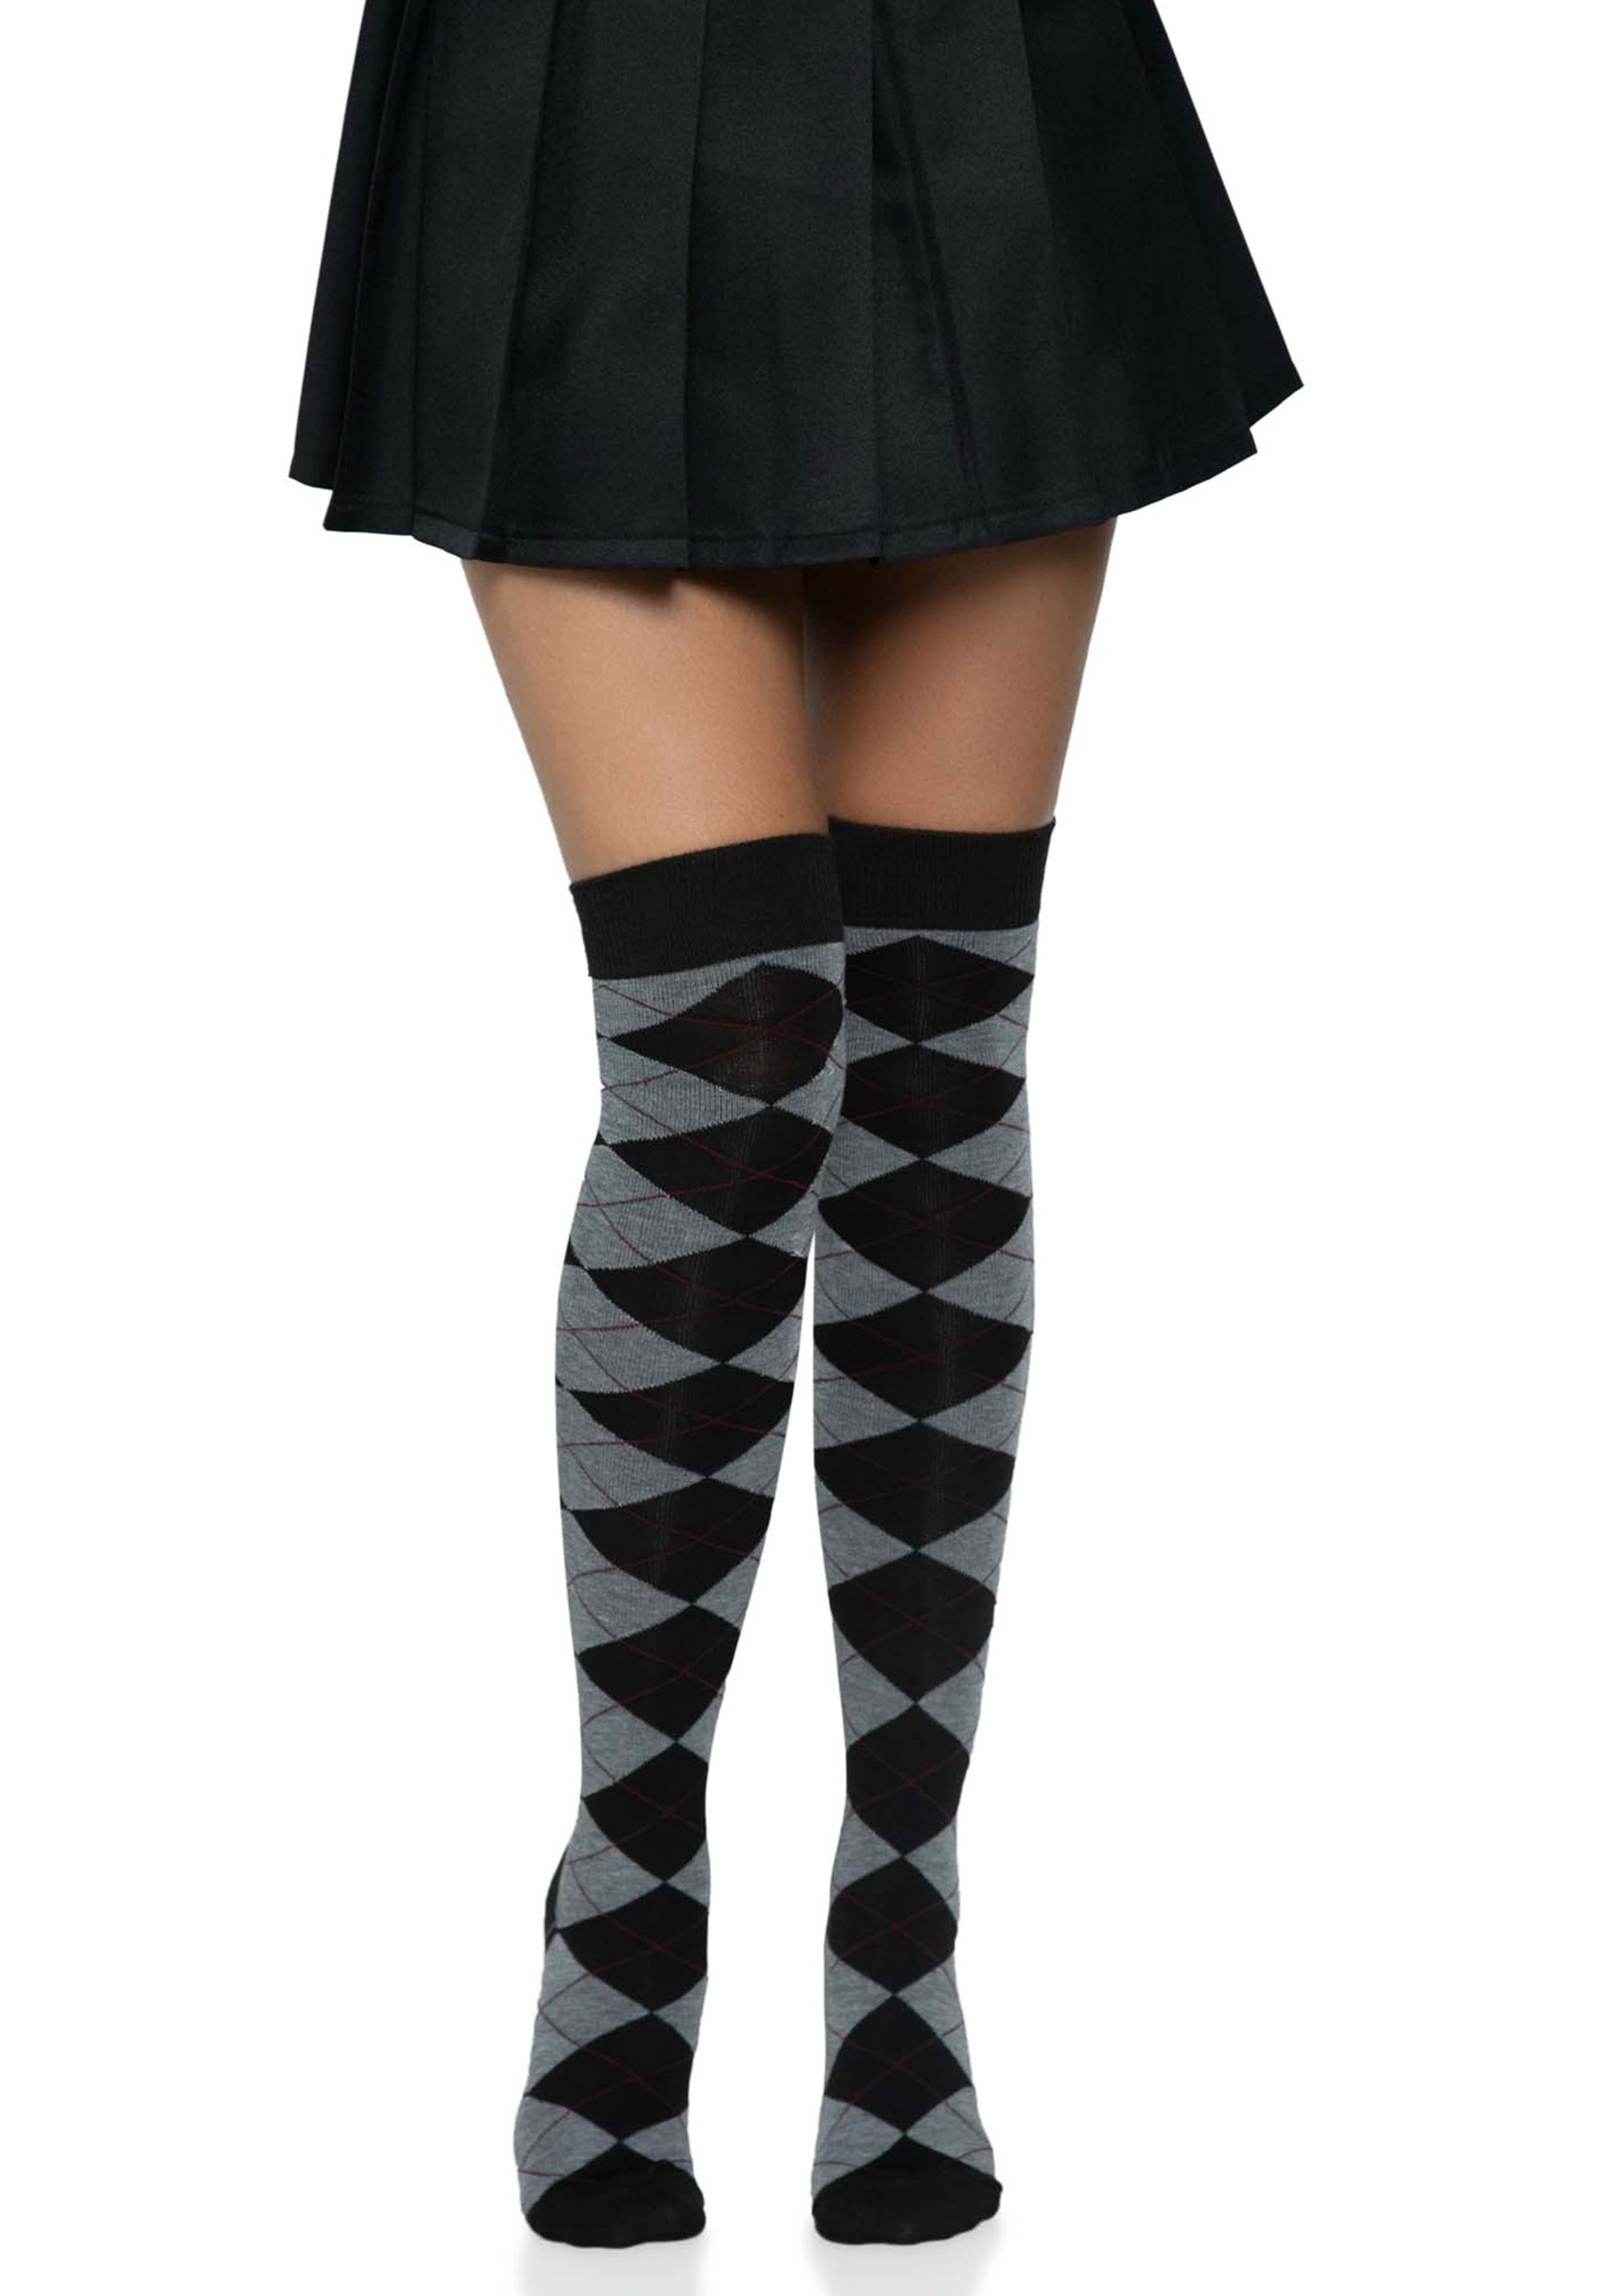 Leg Avenue Argyle Thigh Highs - Black and grey knitted argyle diamond golf style patterned over the knee socks.